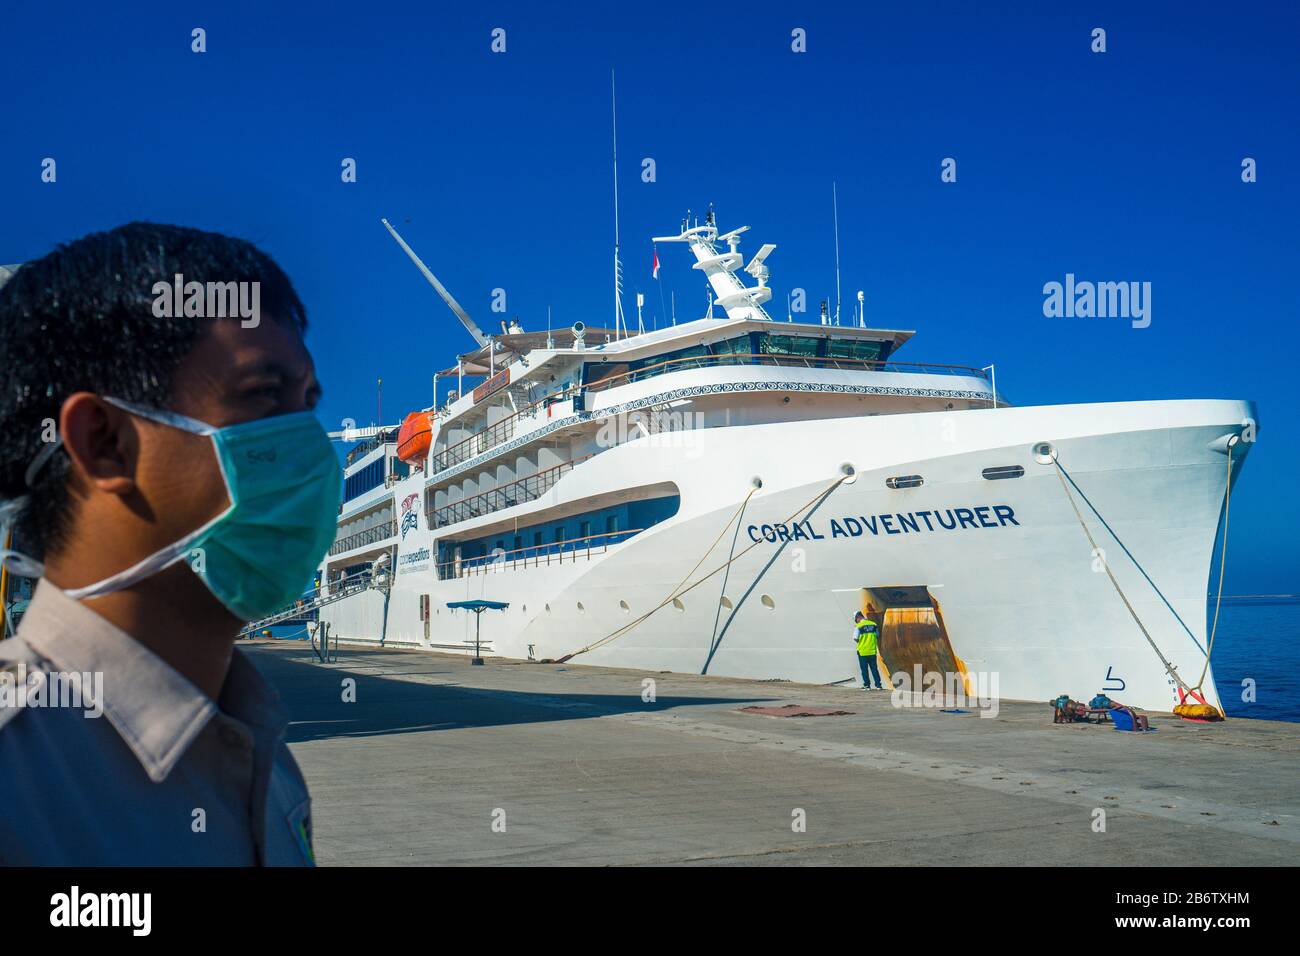 Makassar, South Sulawesi, Indonesia. 12th Mar, 2020. A cruise ship from  Australia, Coral Adventure docked at Soekarno-Hatta Harbor. This ship  carries 44 passengers and 34 crew who will be in Makassar City